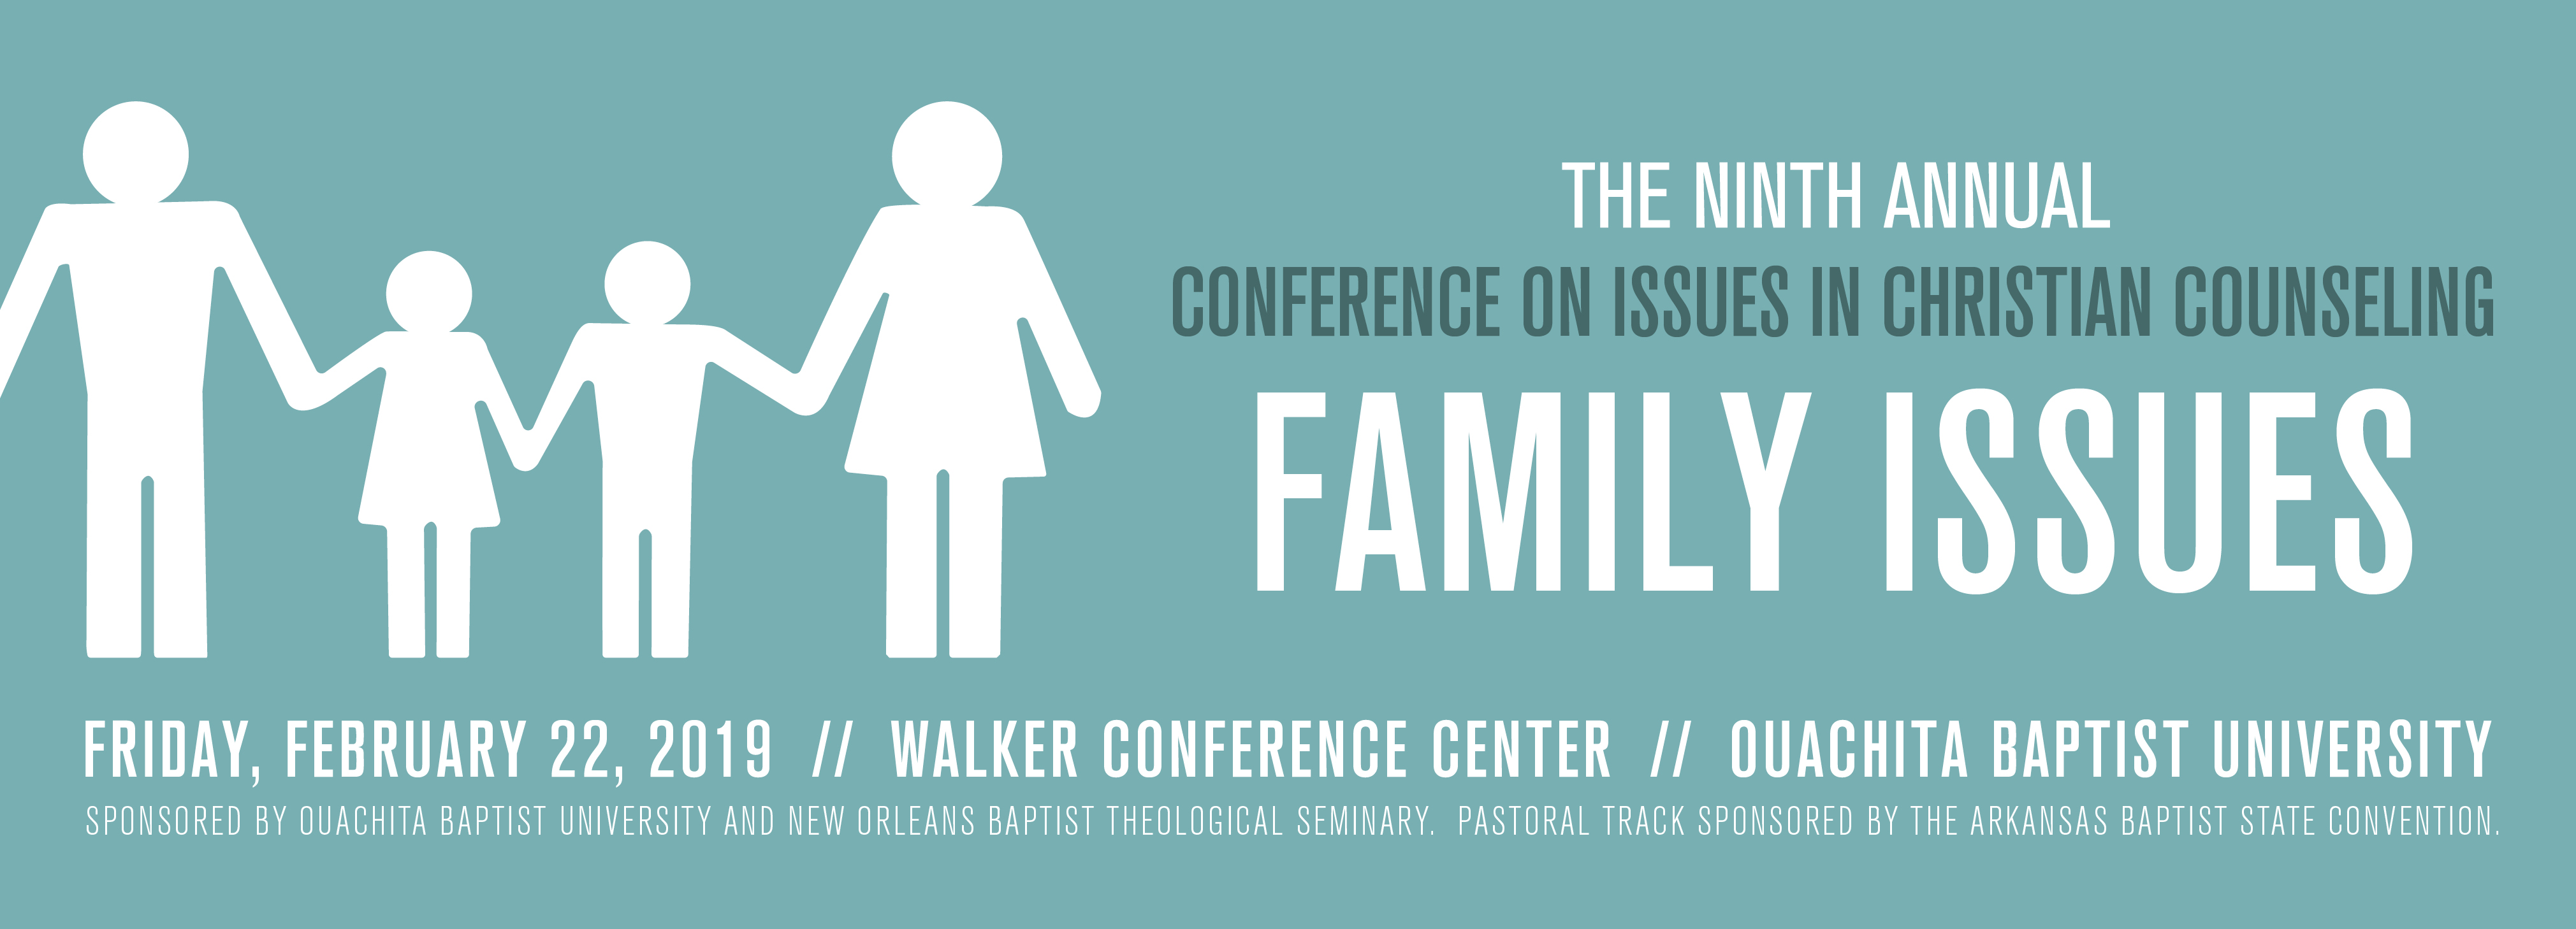 Ouachita’s 2019 Issues in Christian Counseling Conference discusses family issues.